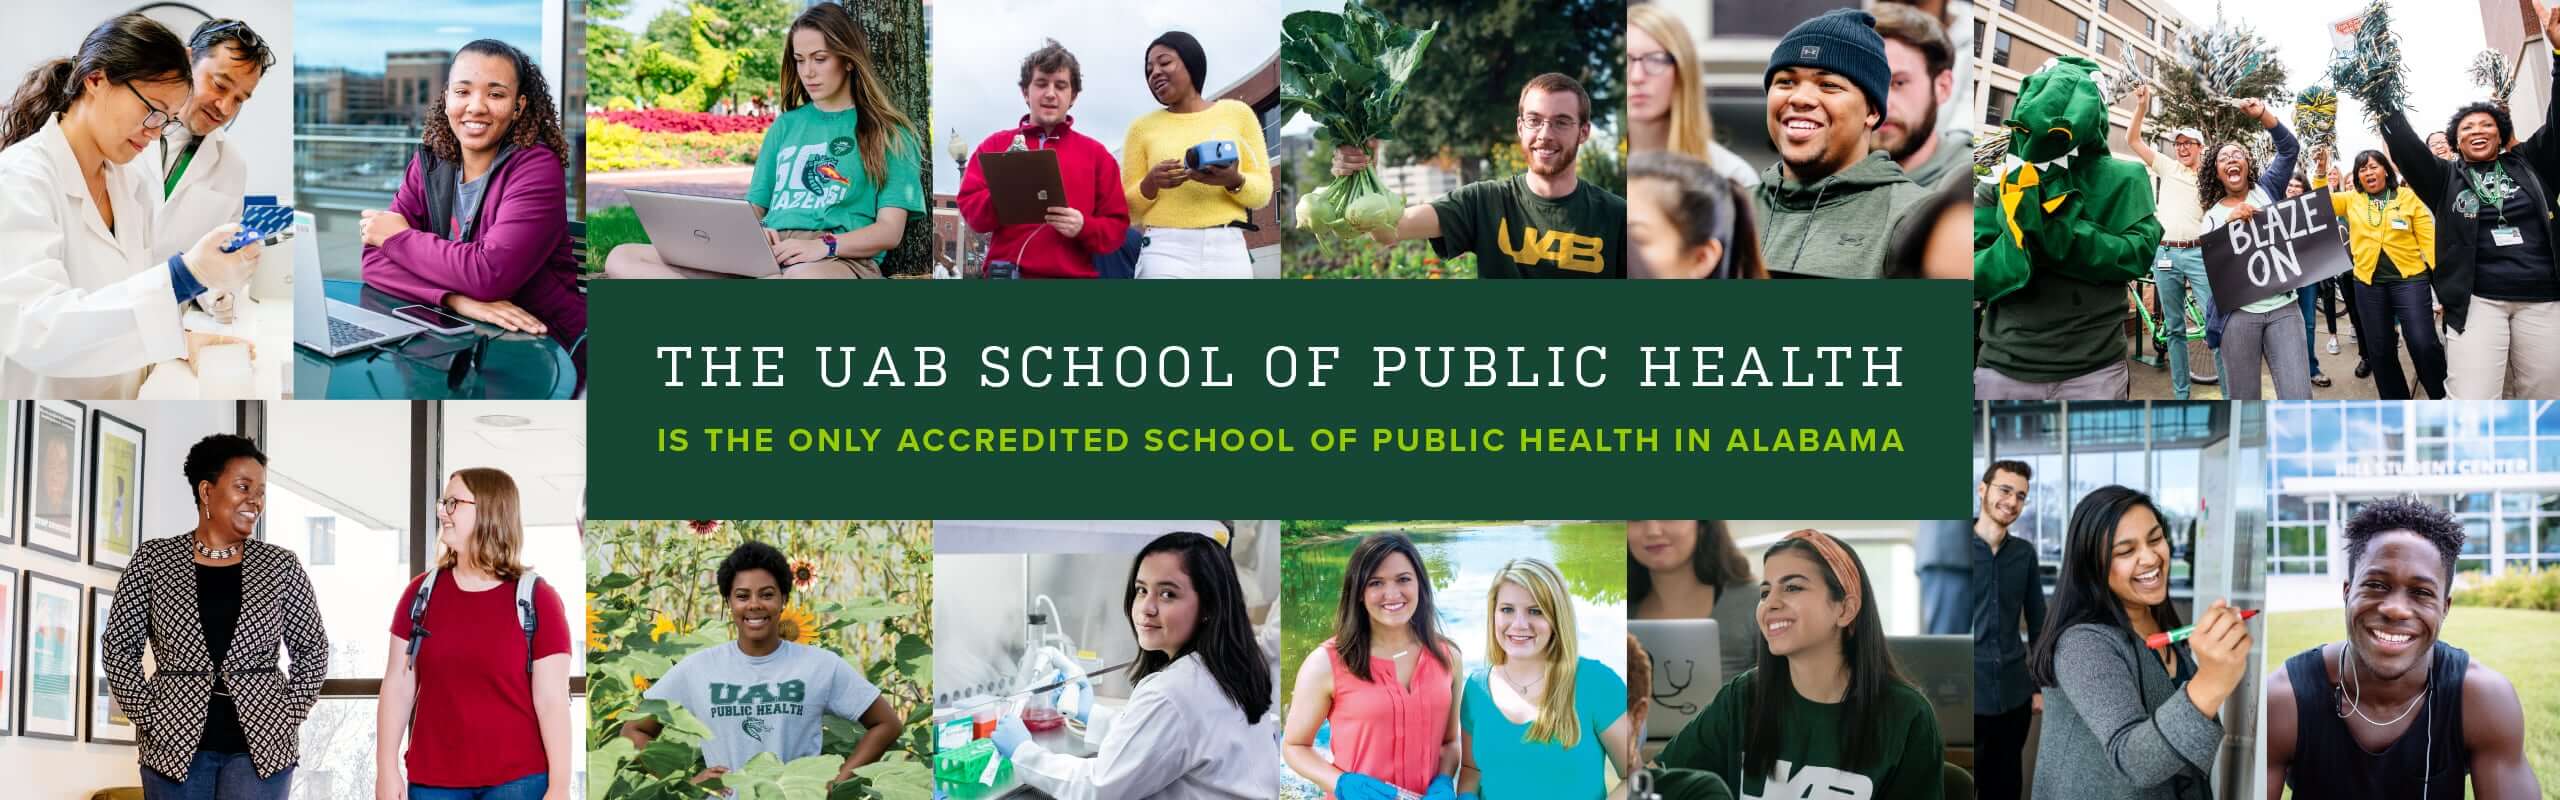 The UAB School of Public health: the only accredited school of public health in Alabama